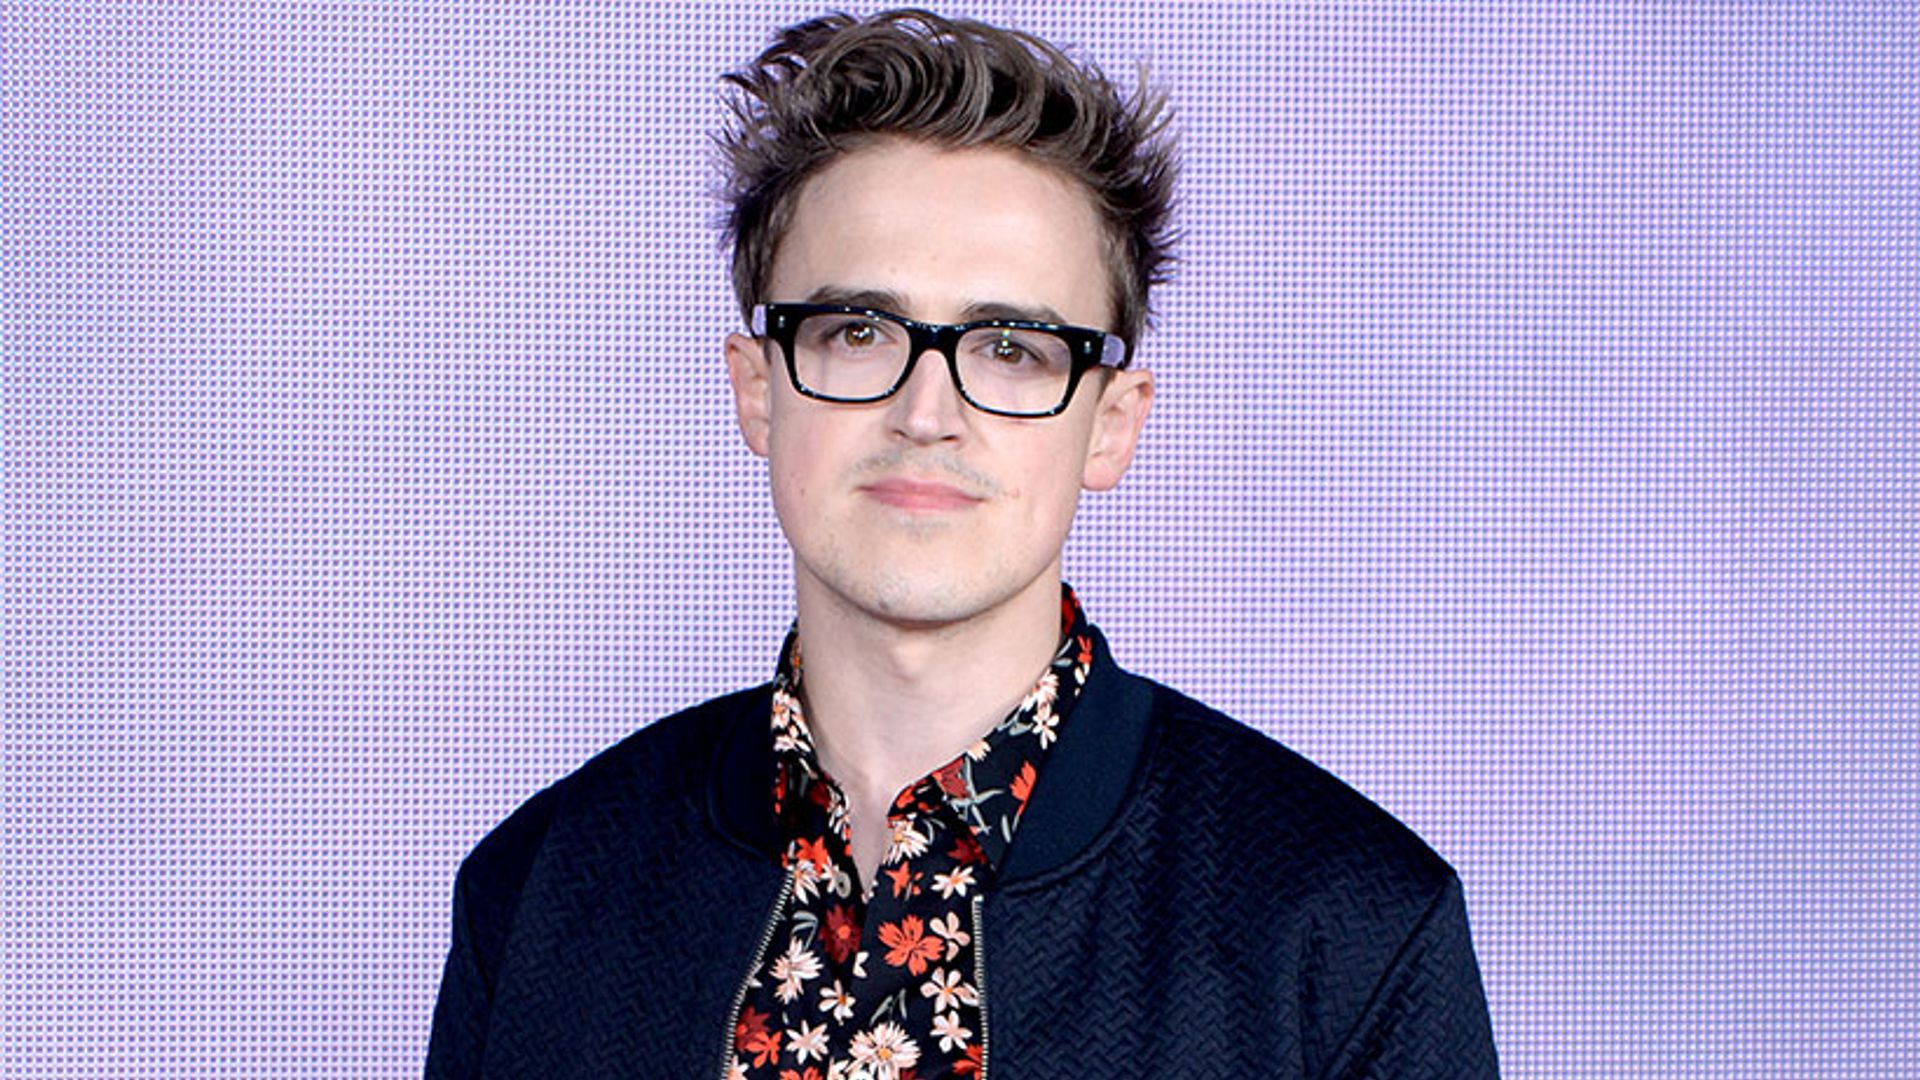 I'm a Celebrity Get Me Out of Here 2016: Tom Fletcher teases fans he's heading to the jungle